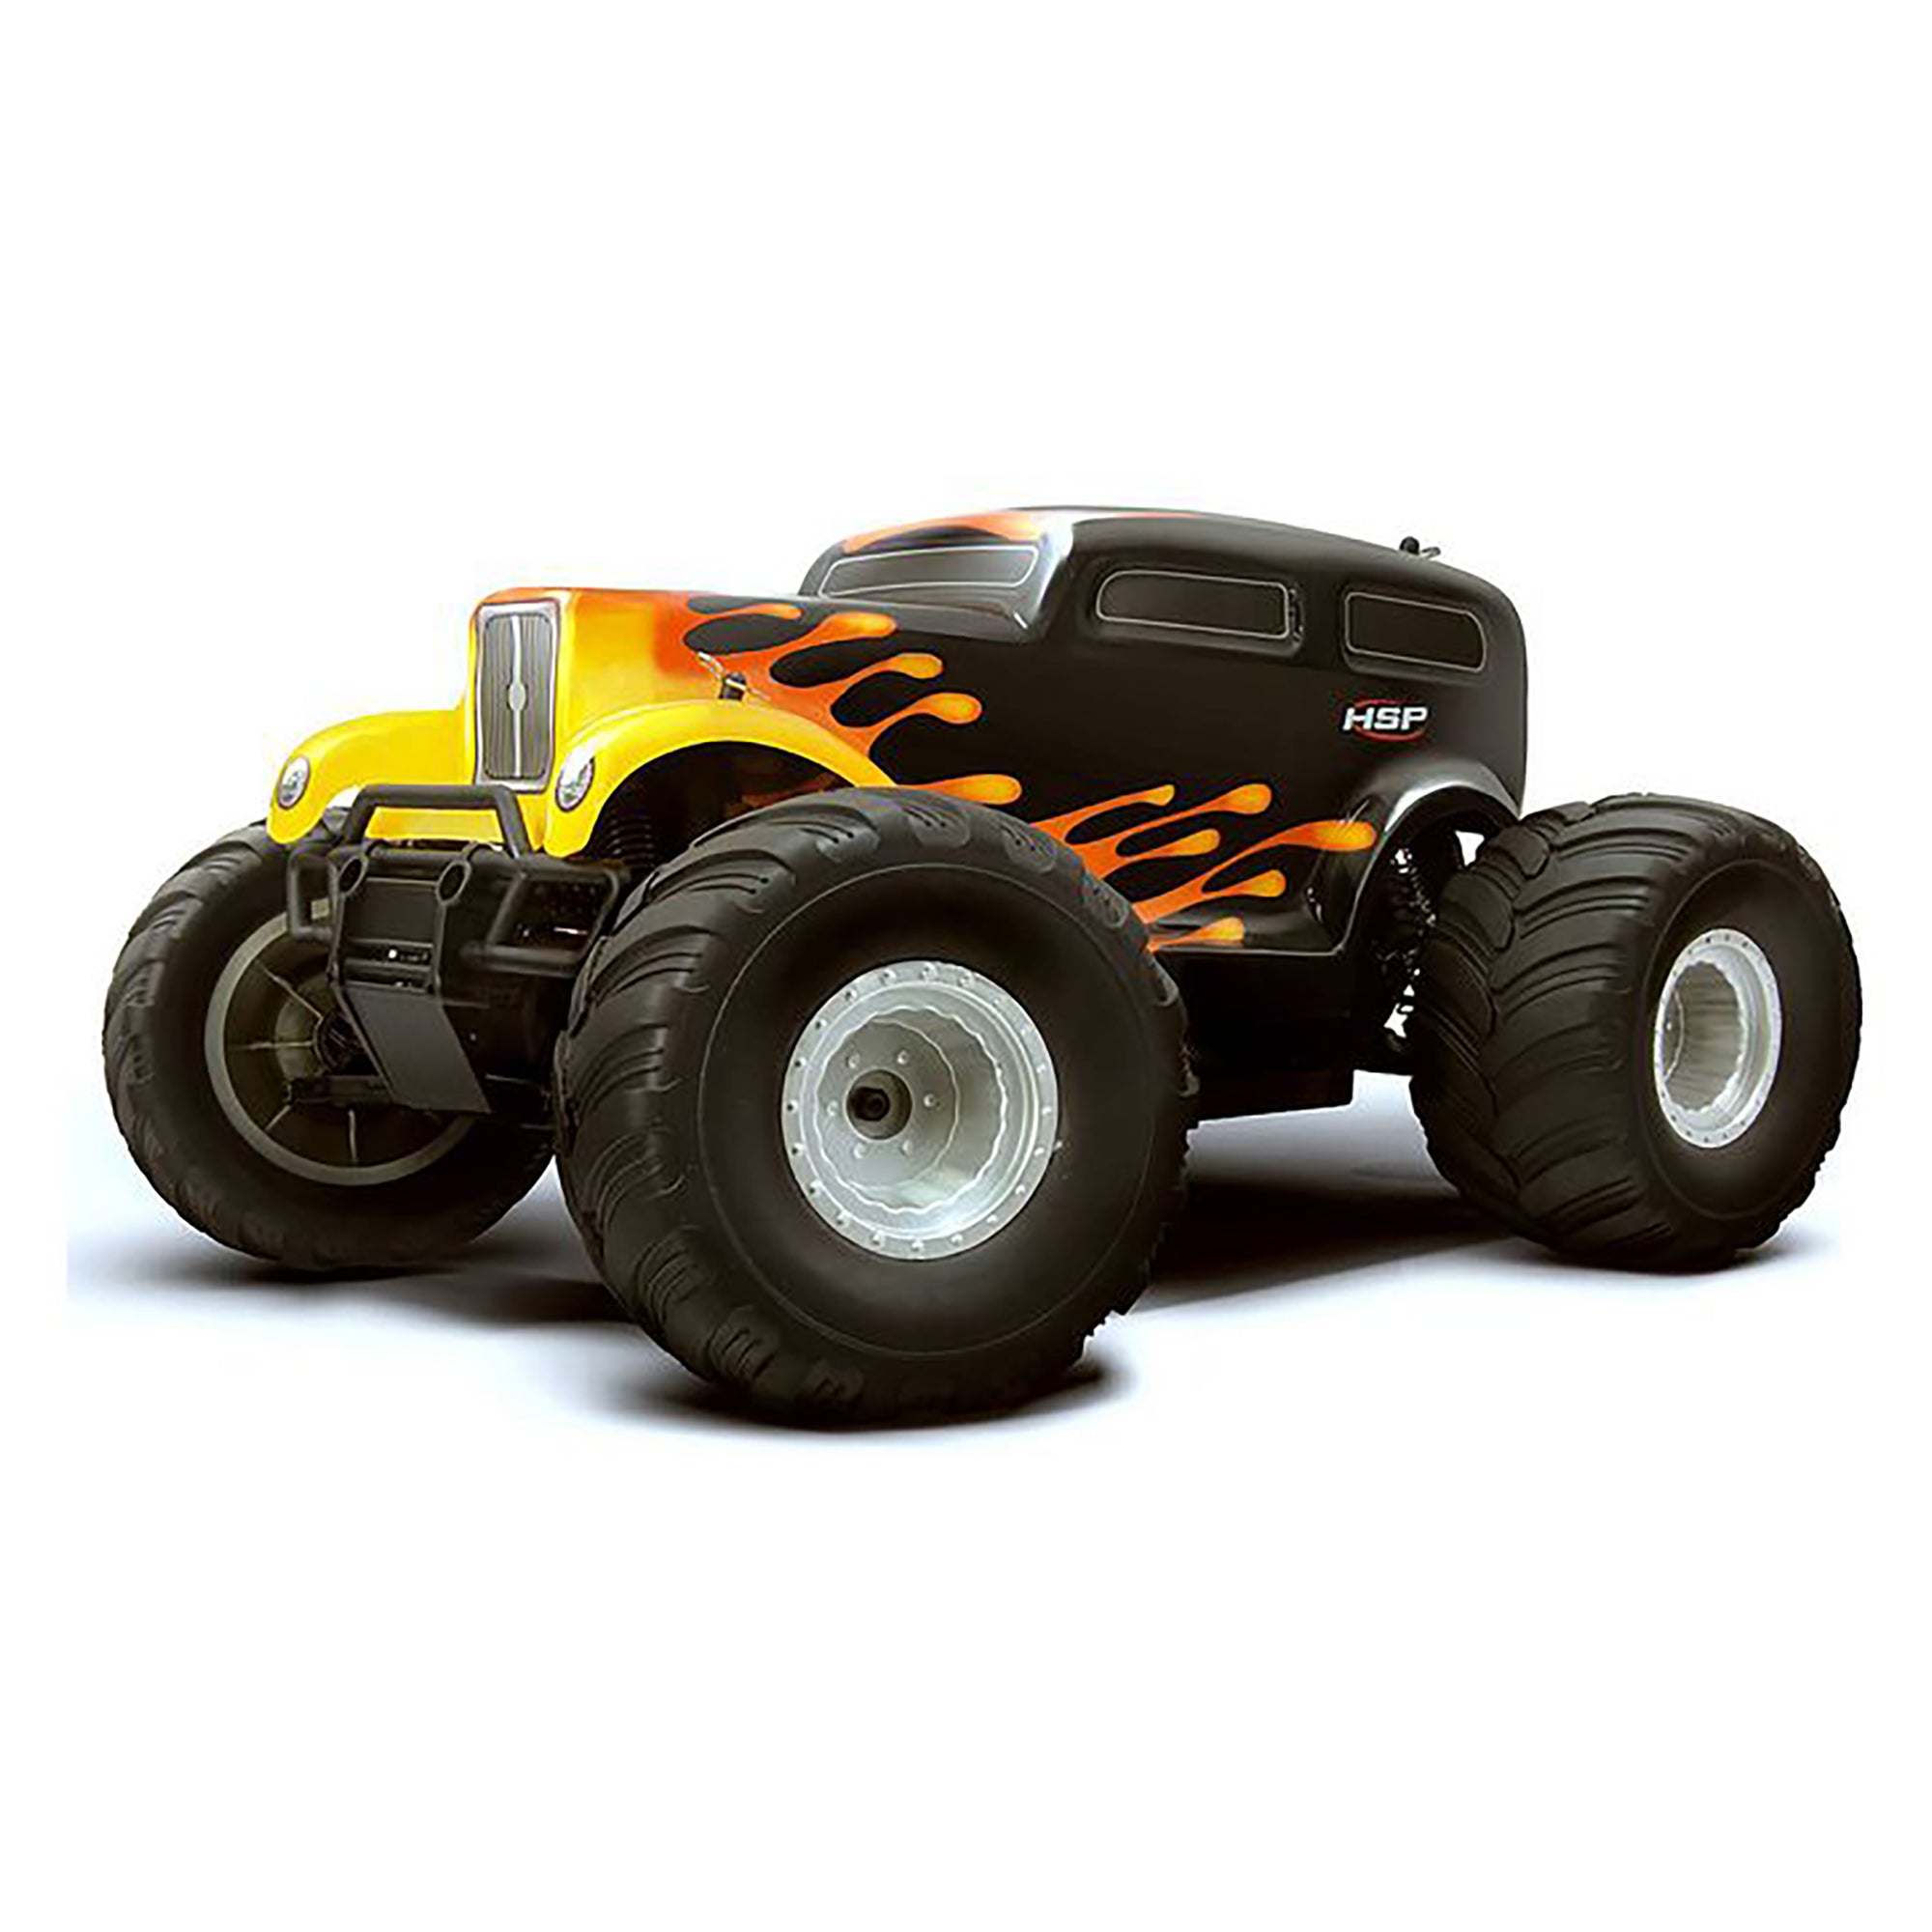 HSP Racing Hot Rod Monster Truck 94111 2.4Ghz Electric 4WD Off Road RTR RC Truck